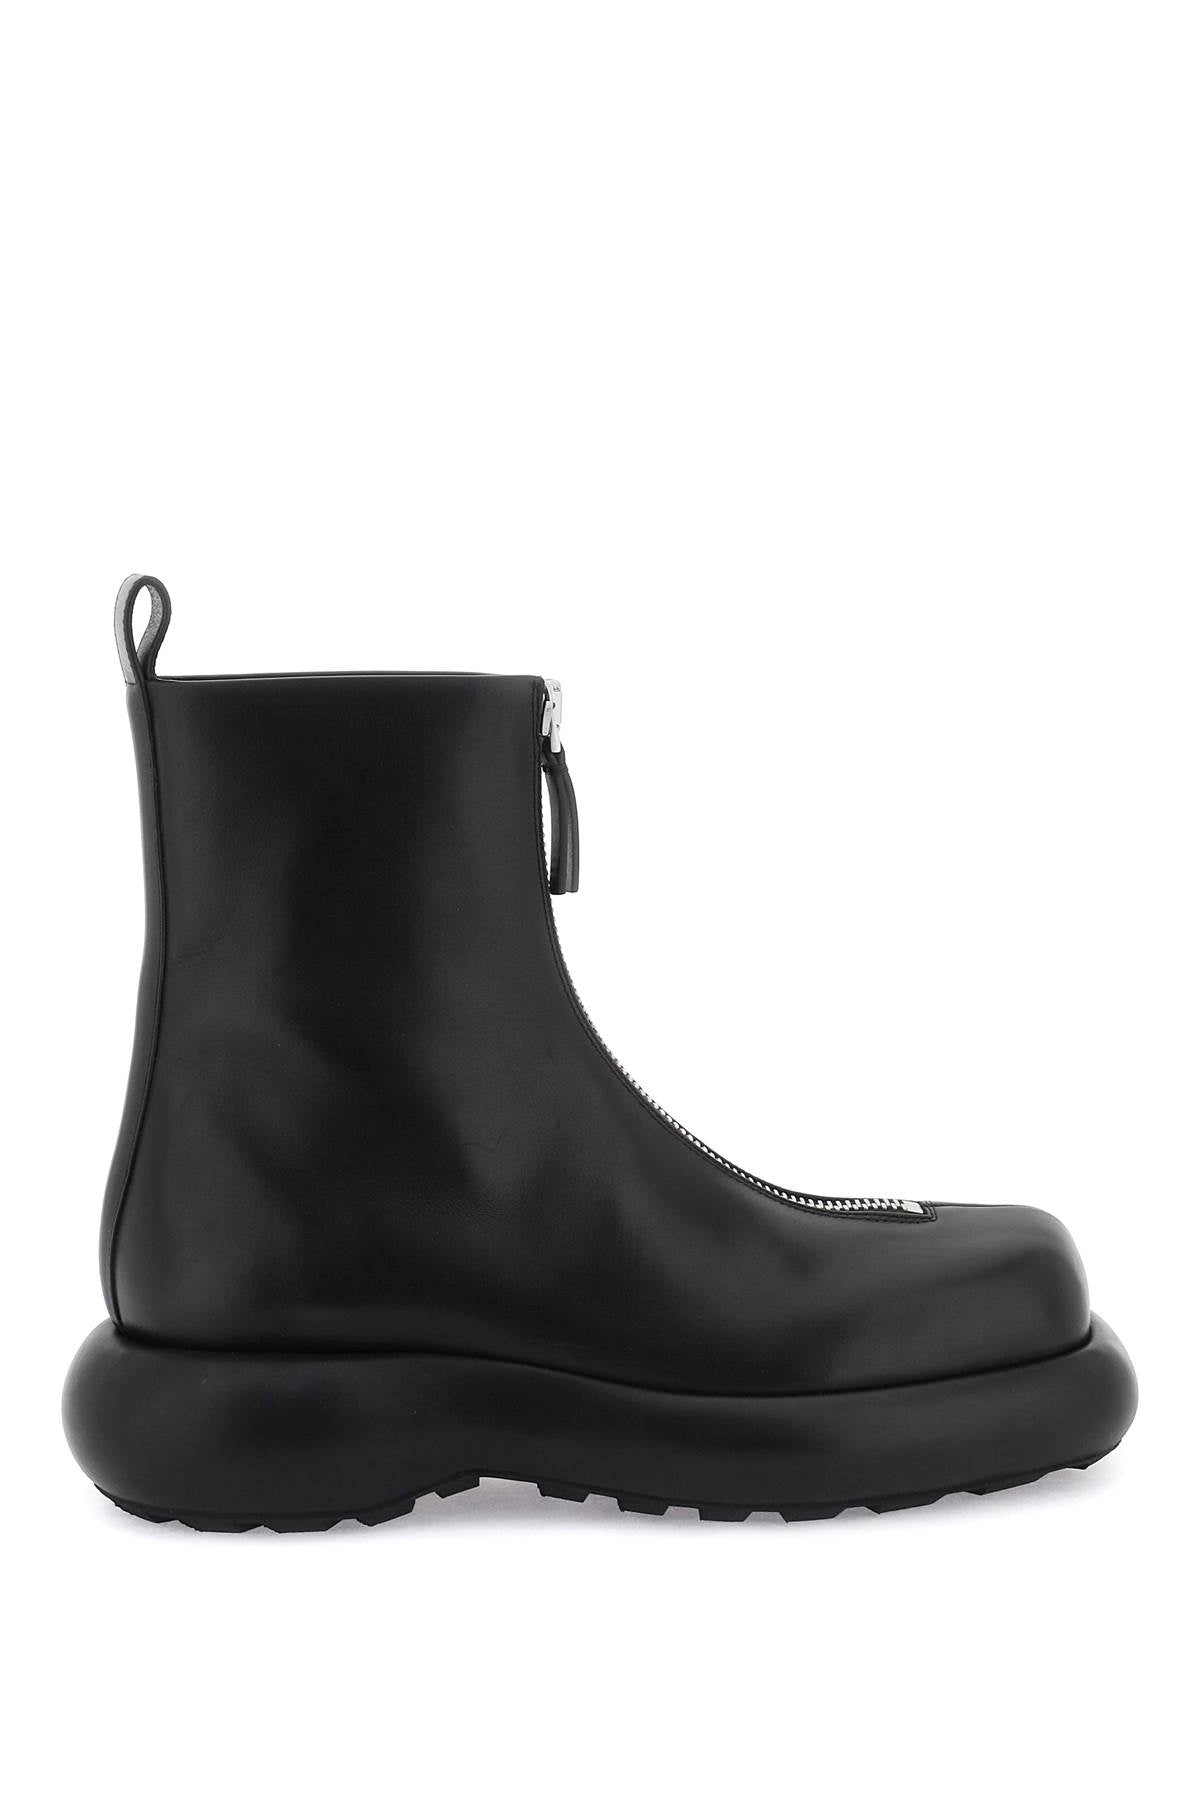 JIL SANDER Zippered Leather Ankle Boots for Women